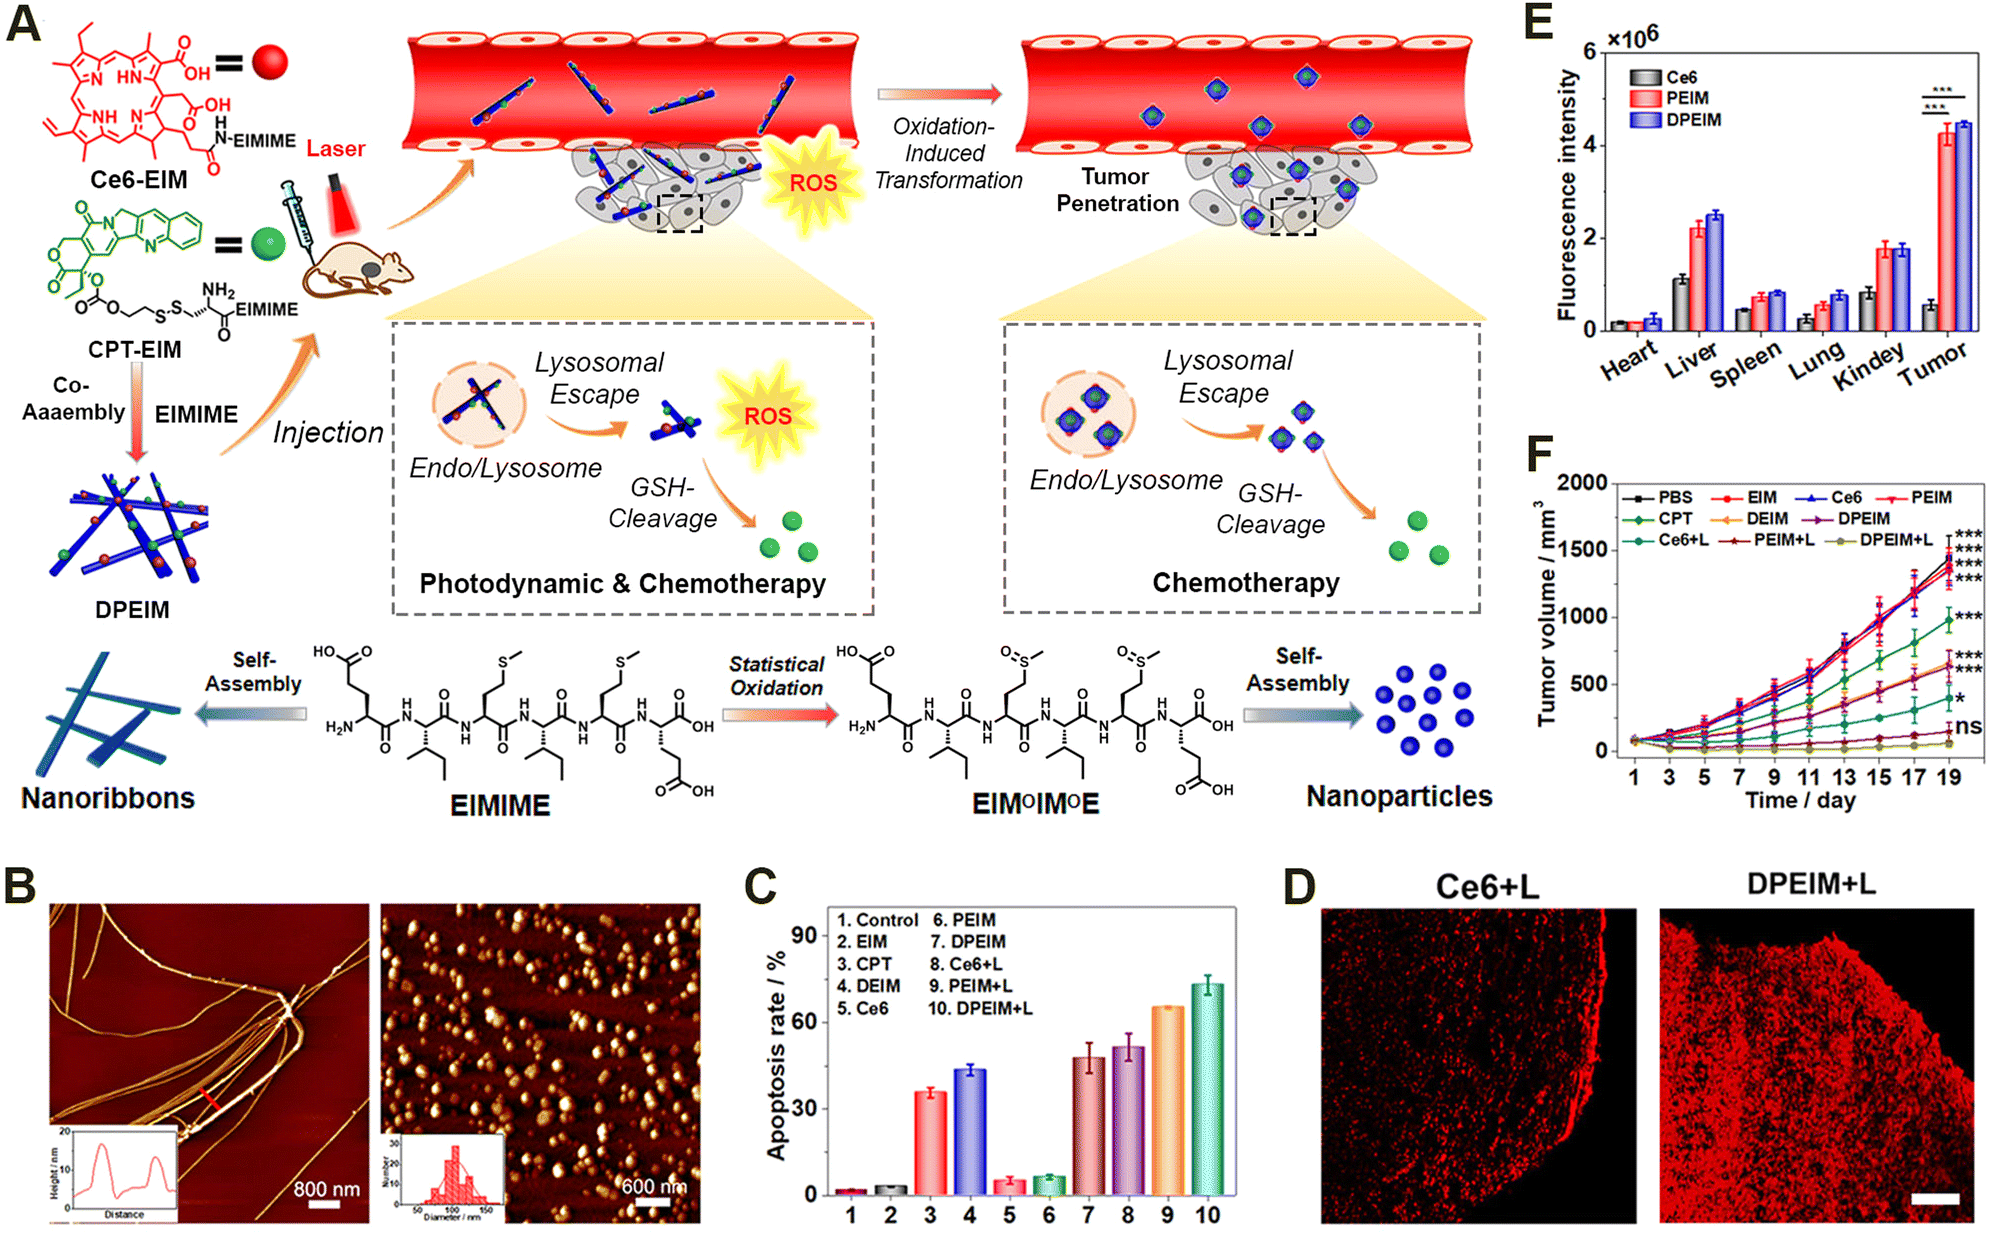 Self-assembly of peptides in living cells for disease theranostics 